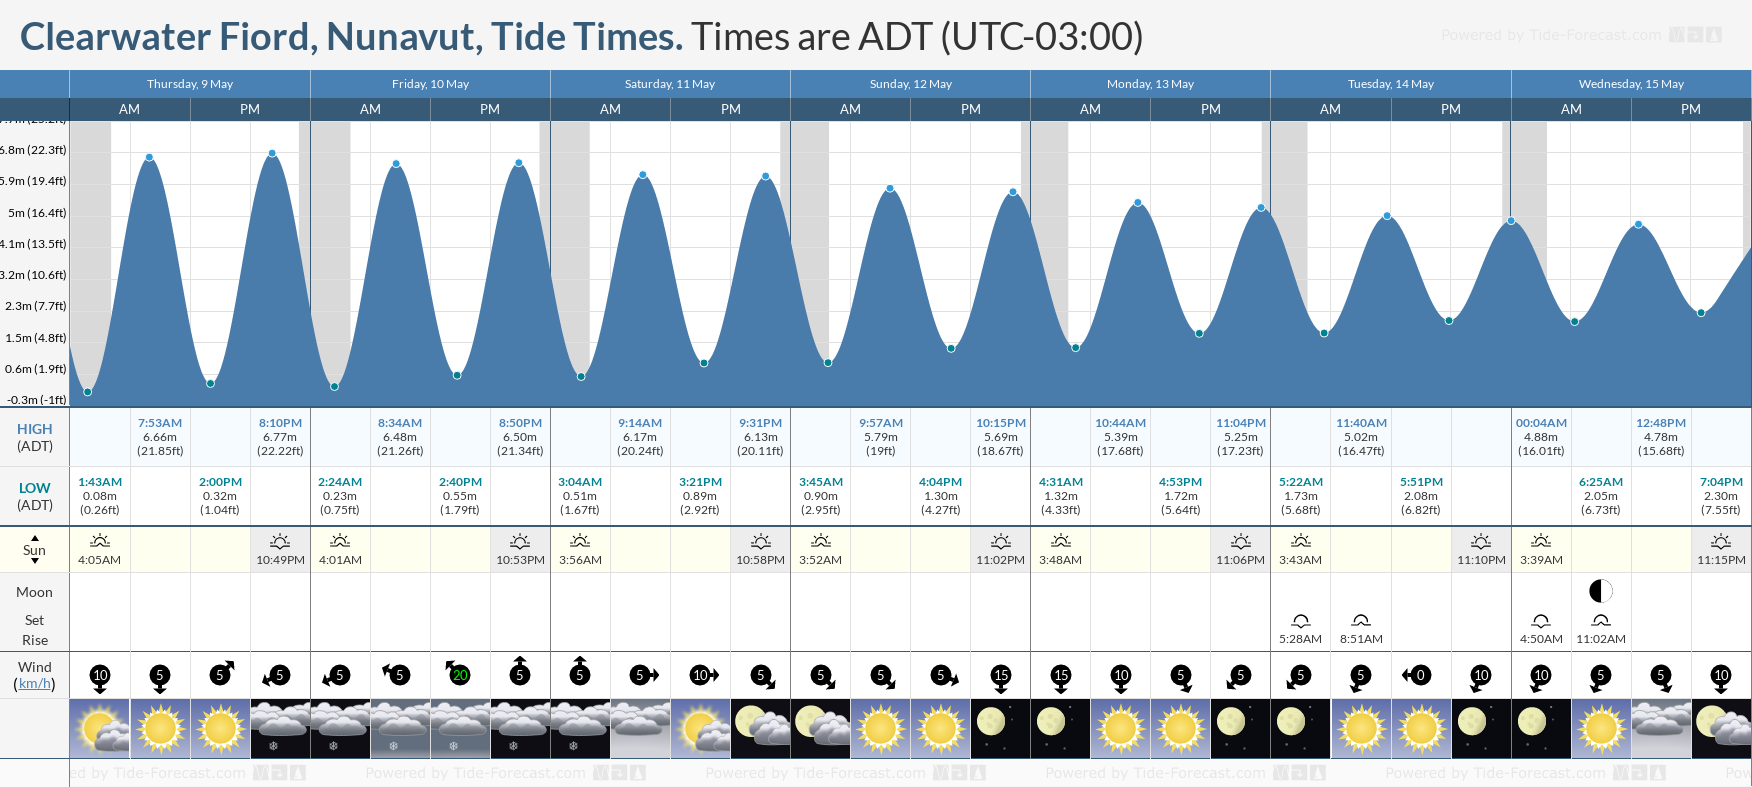 Clearwater Fiord, Nunavut Tide Chart including high and low tide tide times for the next 7 days